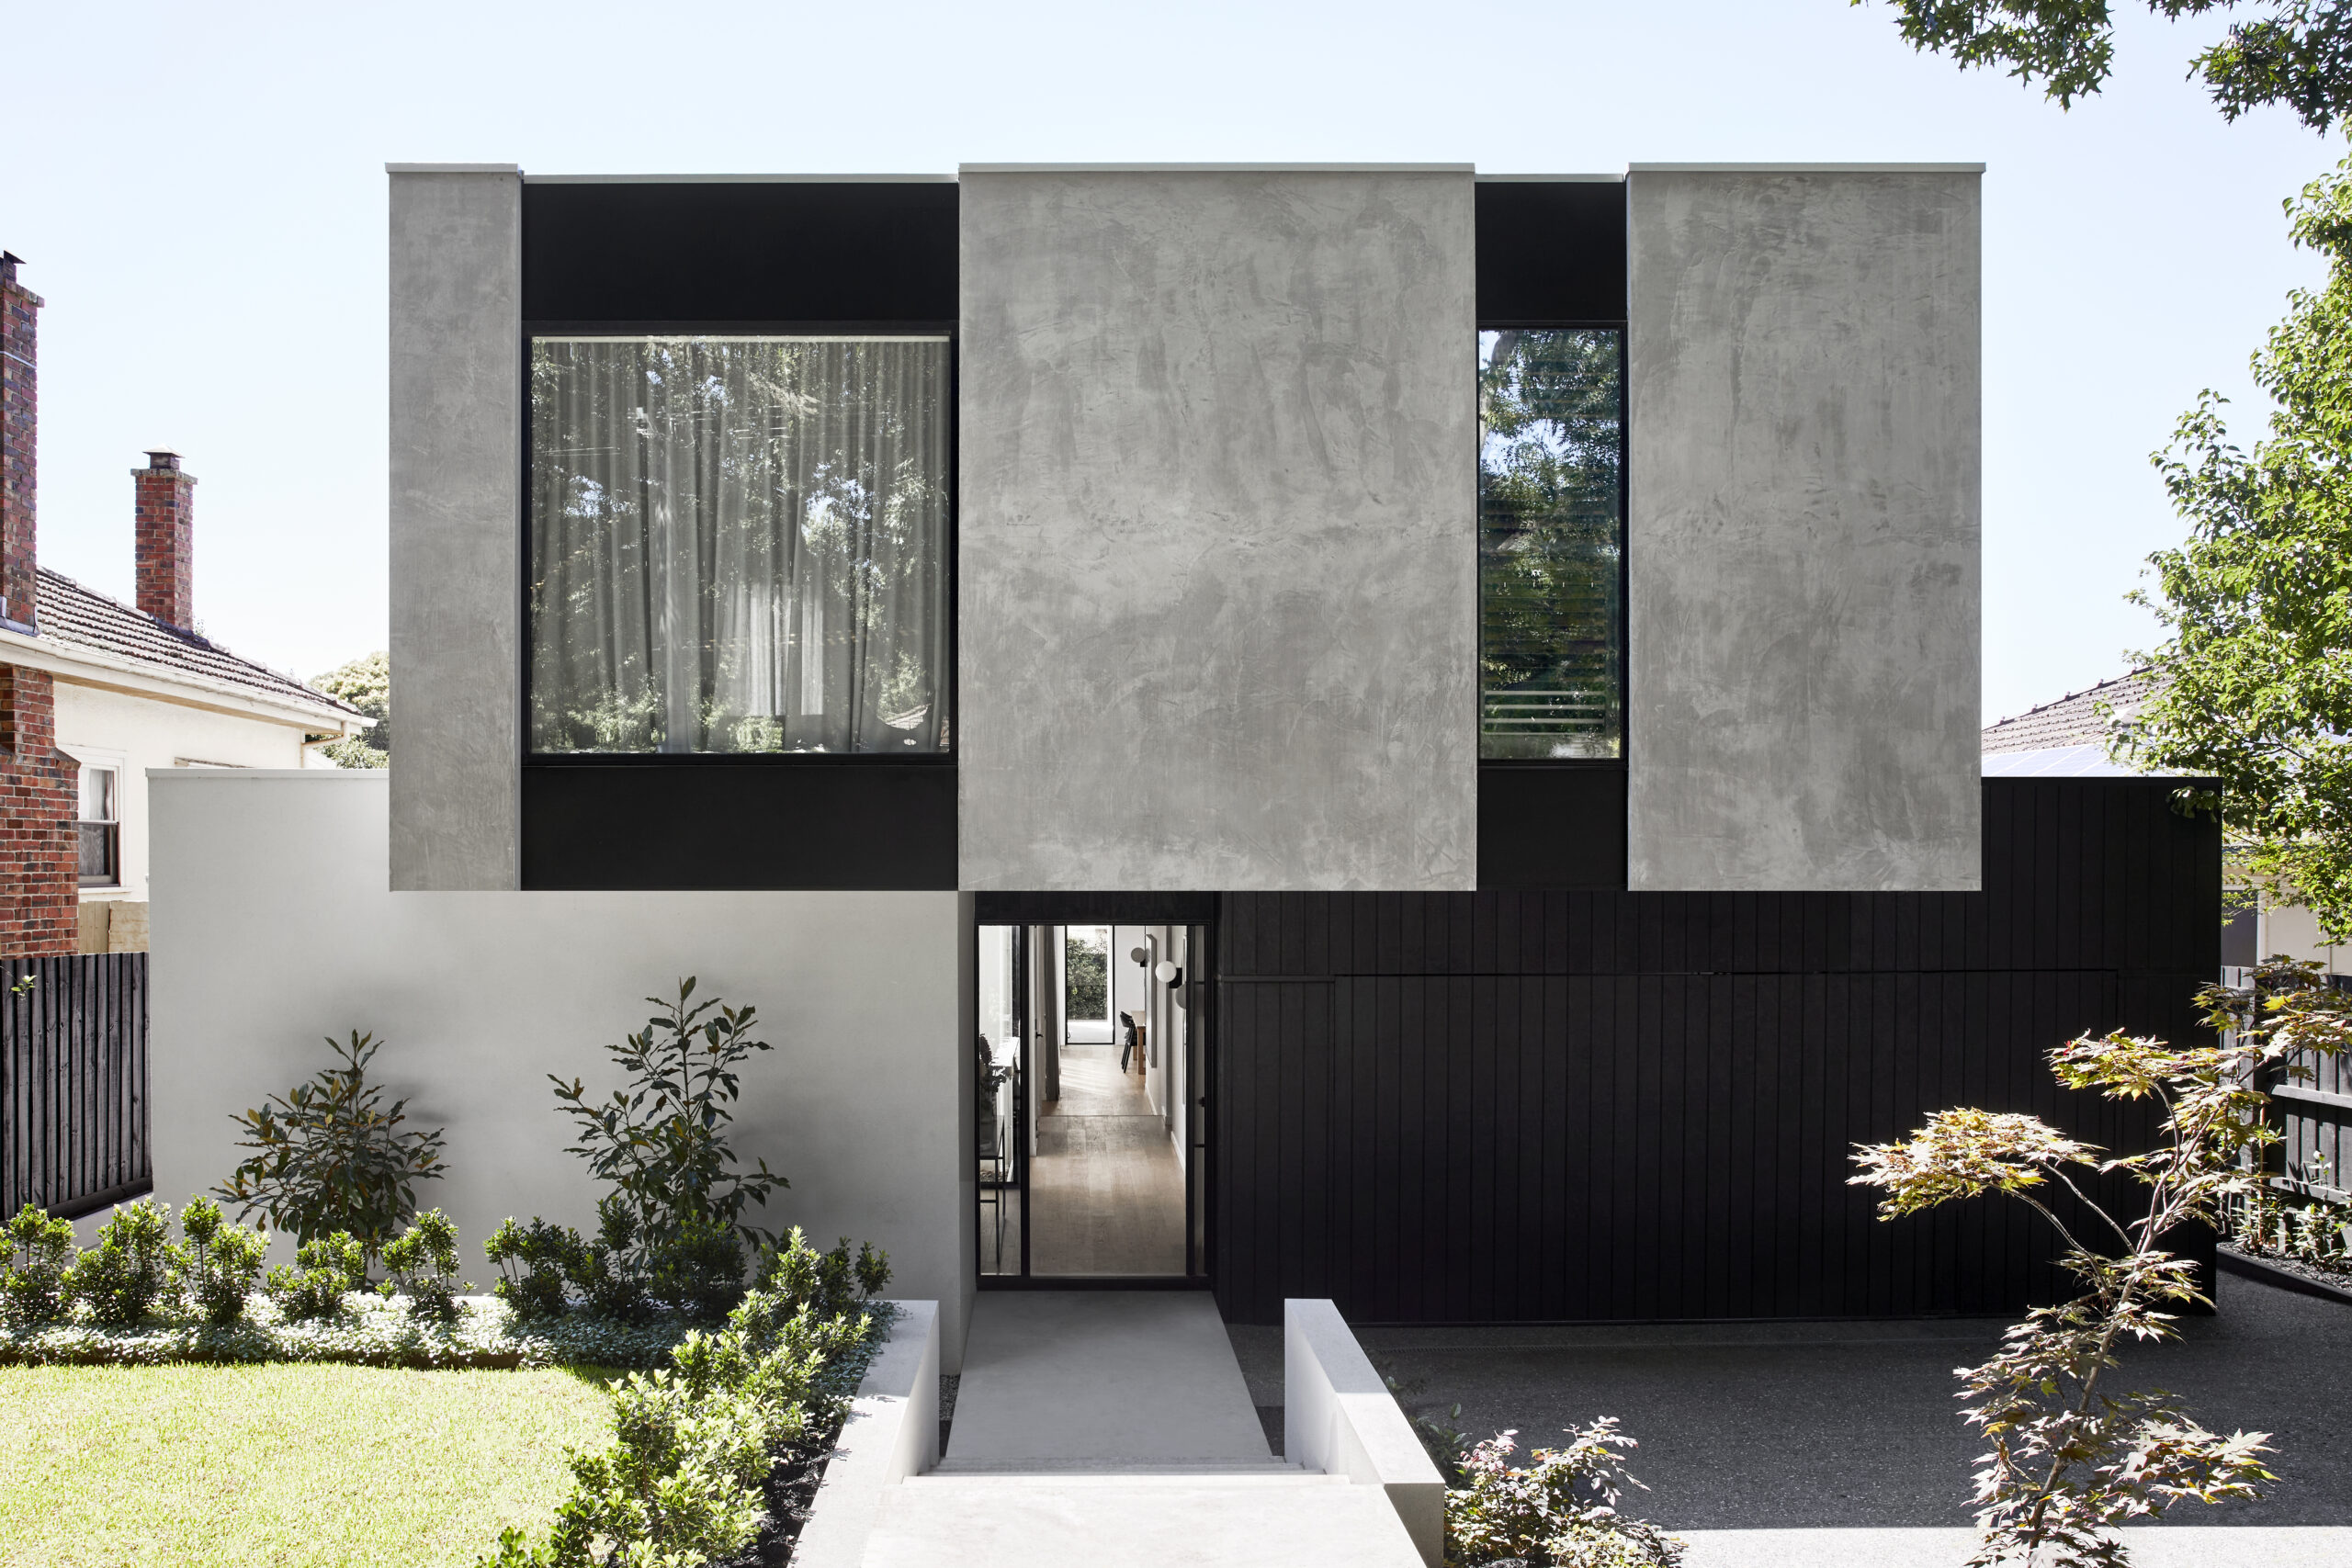 The façade of a double-storey home with grey, concrete-look Hebel and dark timber cladding.